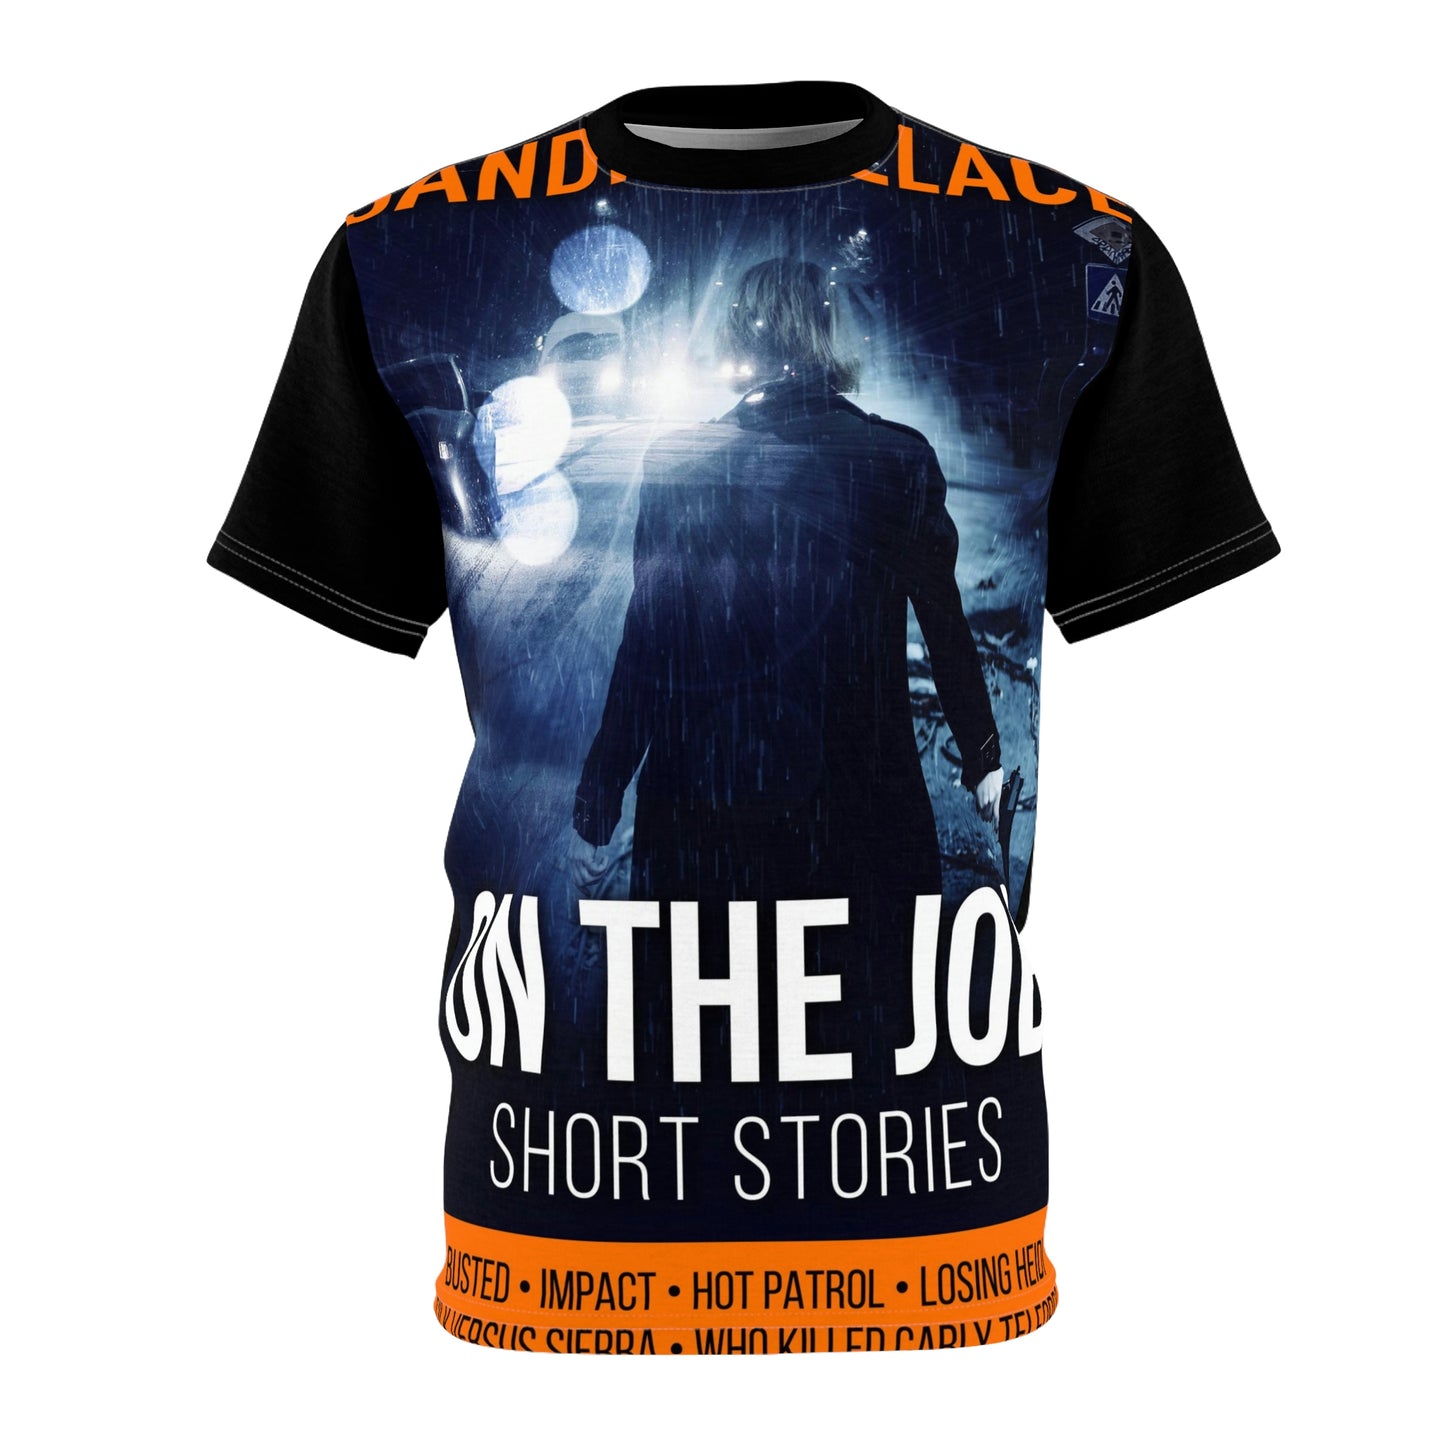 On The Job - Unisex All-Over Print Cut & Sew T-Shirt